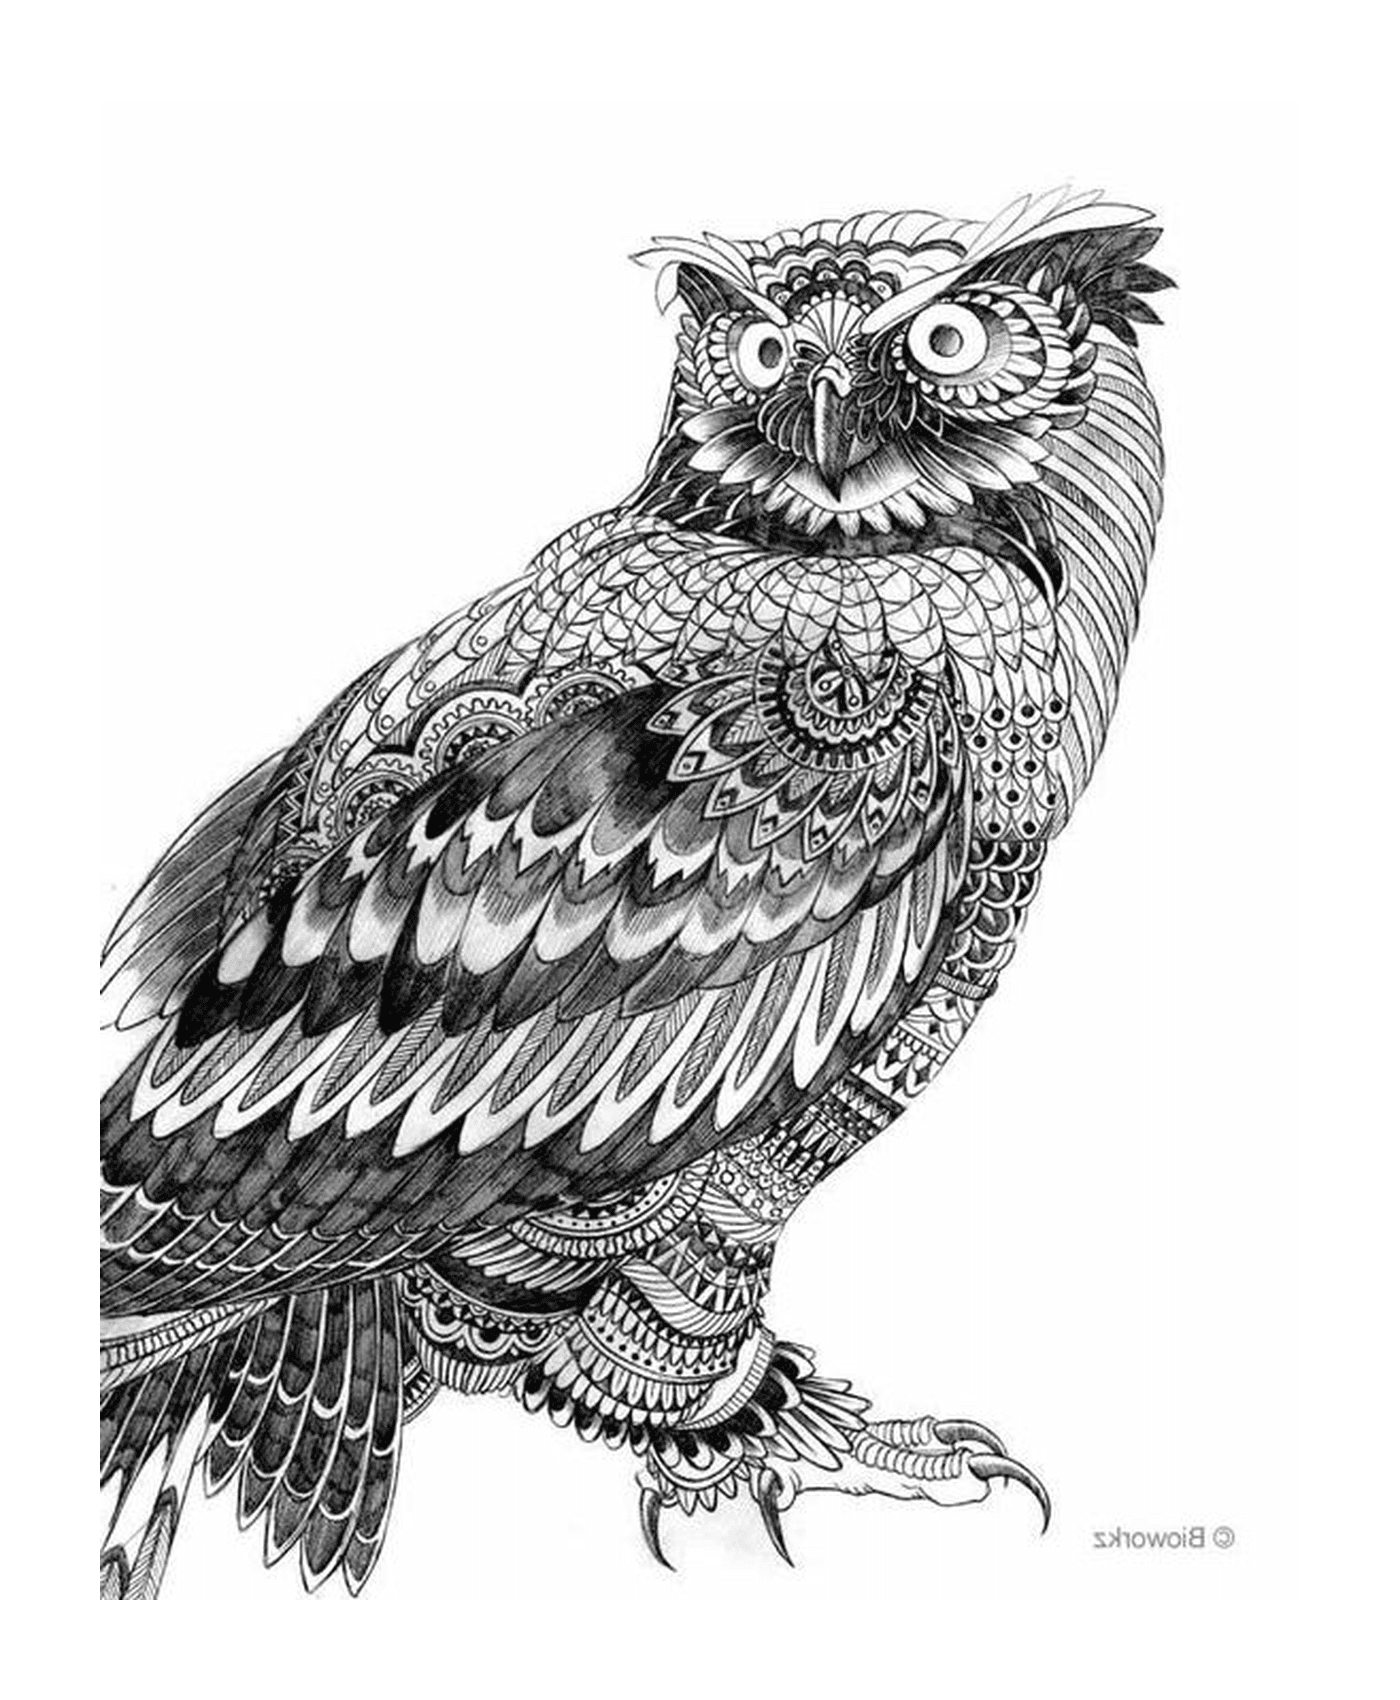  An owl designed in a complex way 